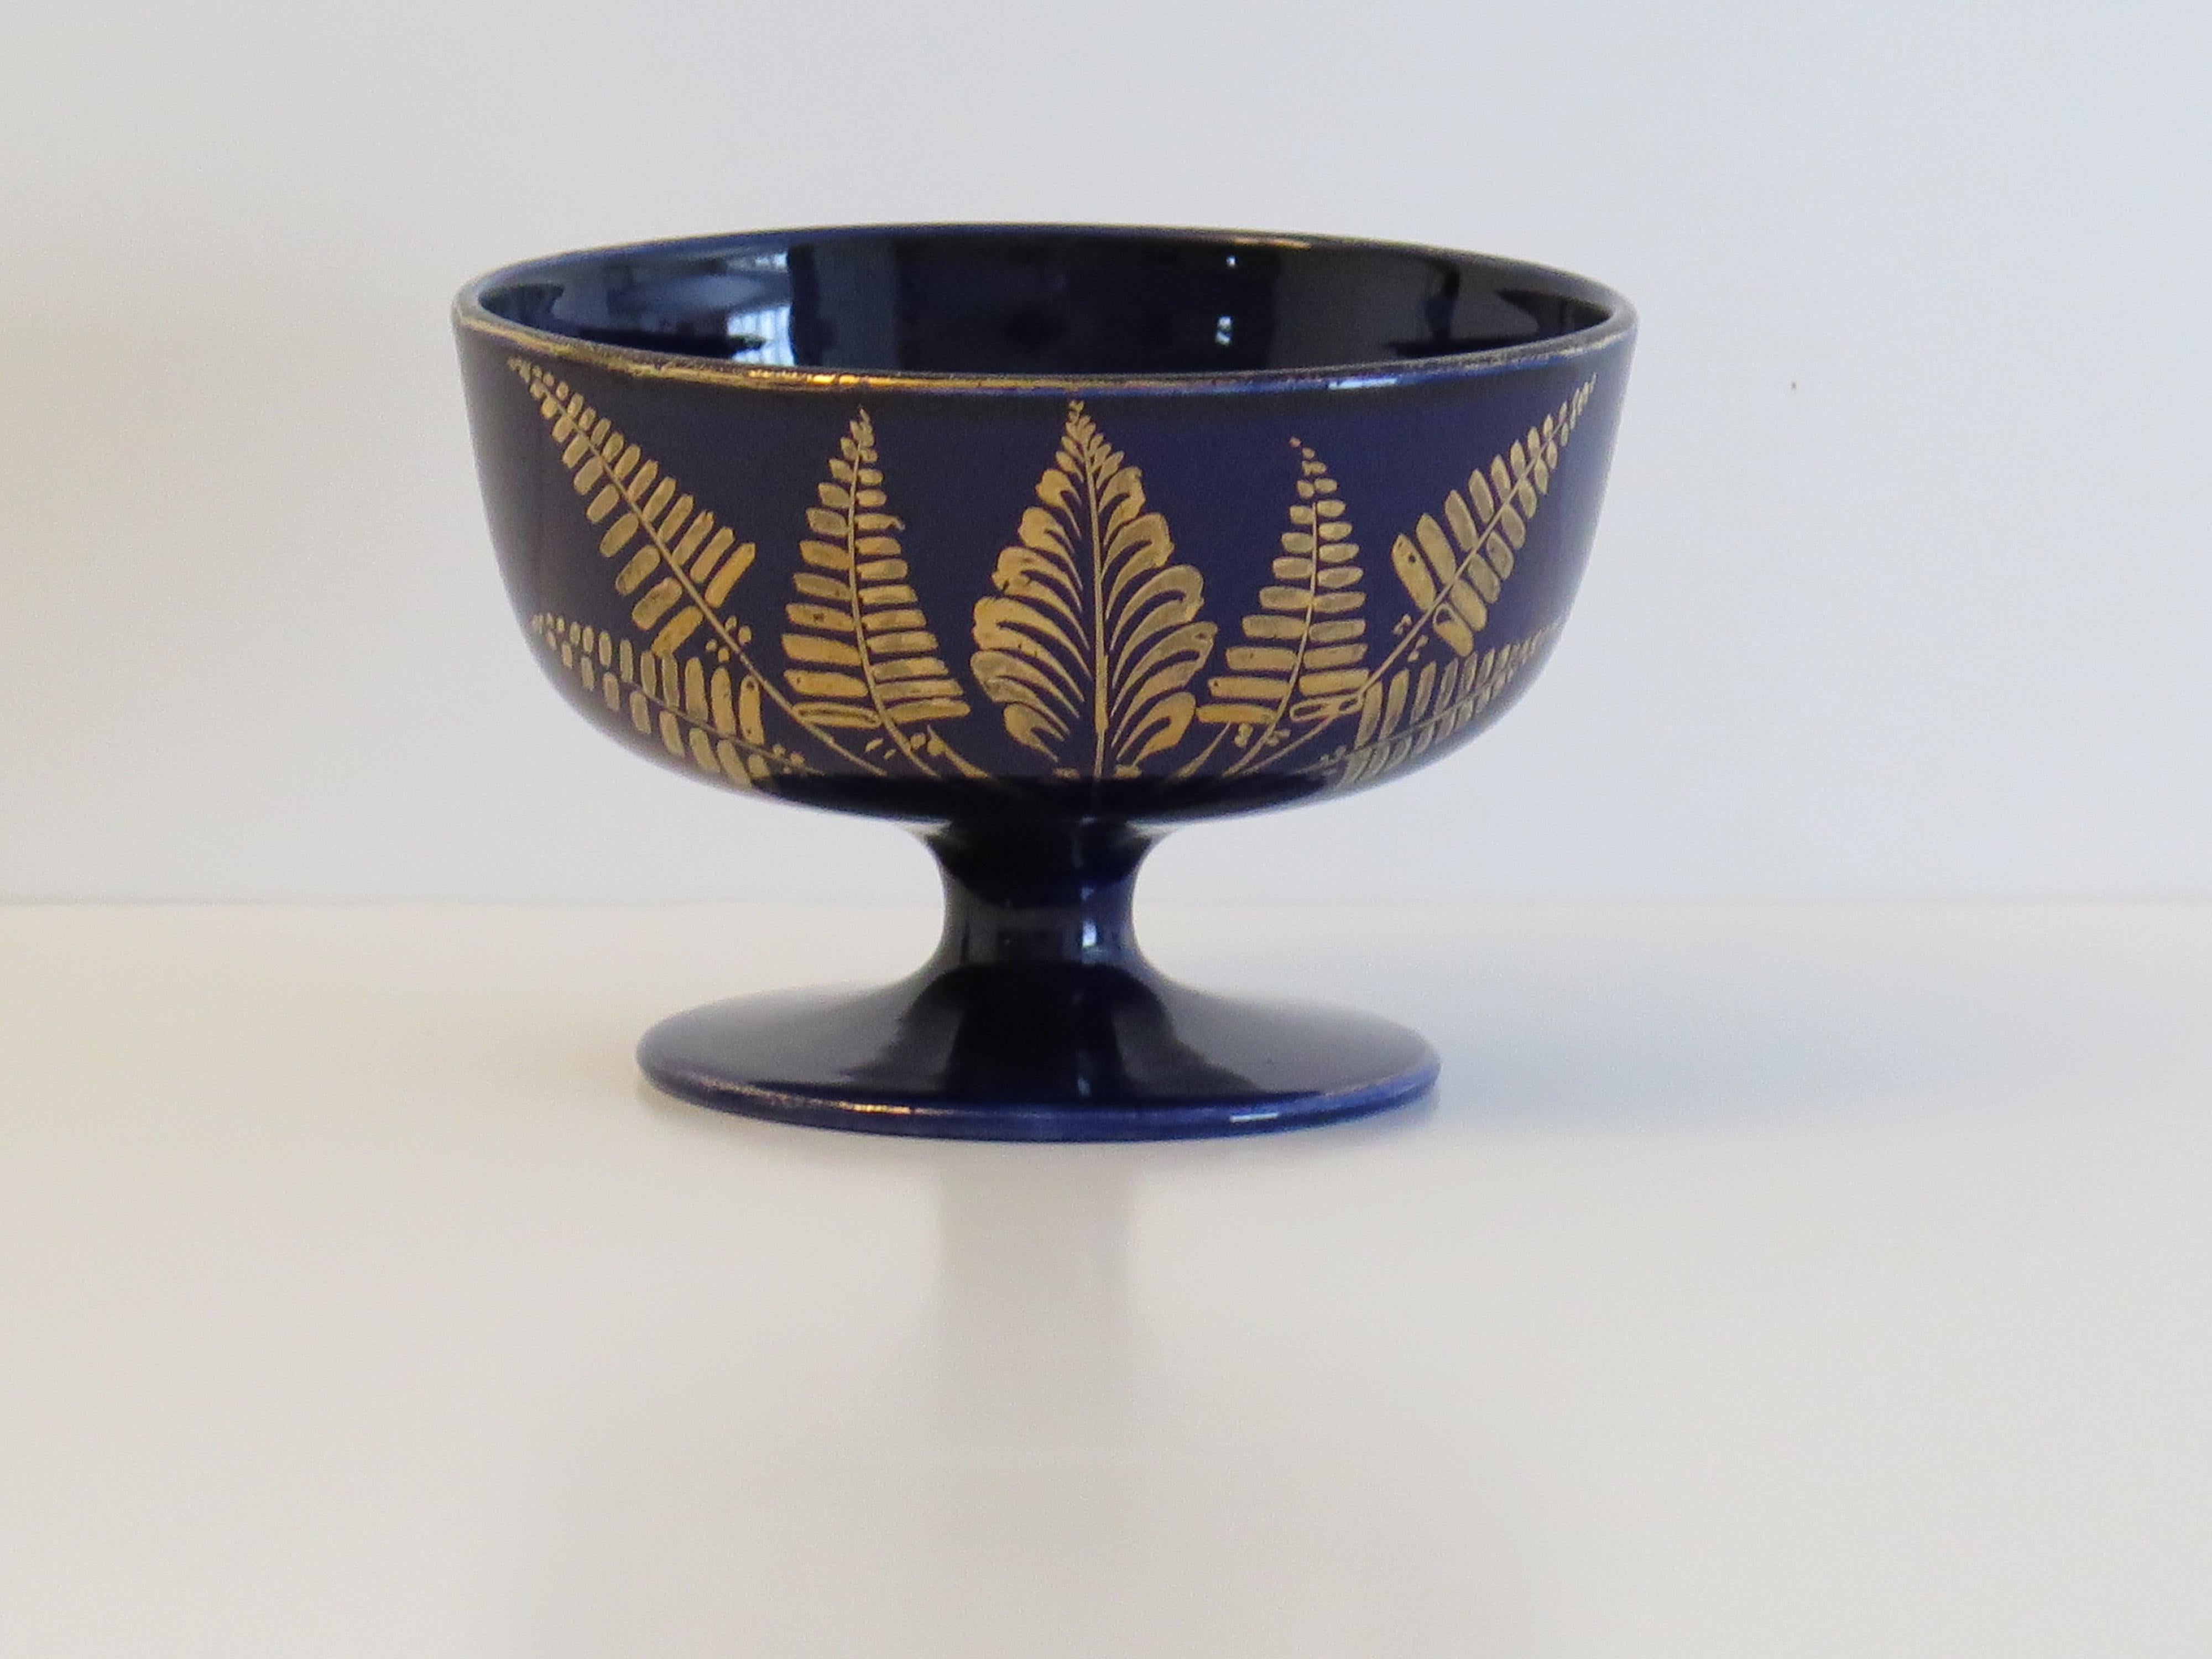 This is a beautiful small Pedestal Bowl made by Mason's Ironstone in the rare gilded fern pattern, dating to the early 19th century, late Georgian period, circa 1818.

Mason's bowls in this shape are rare. 

The bowl is circular on a low pedestal